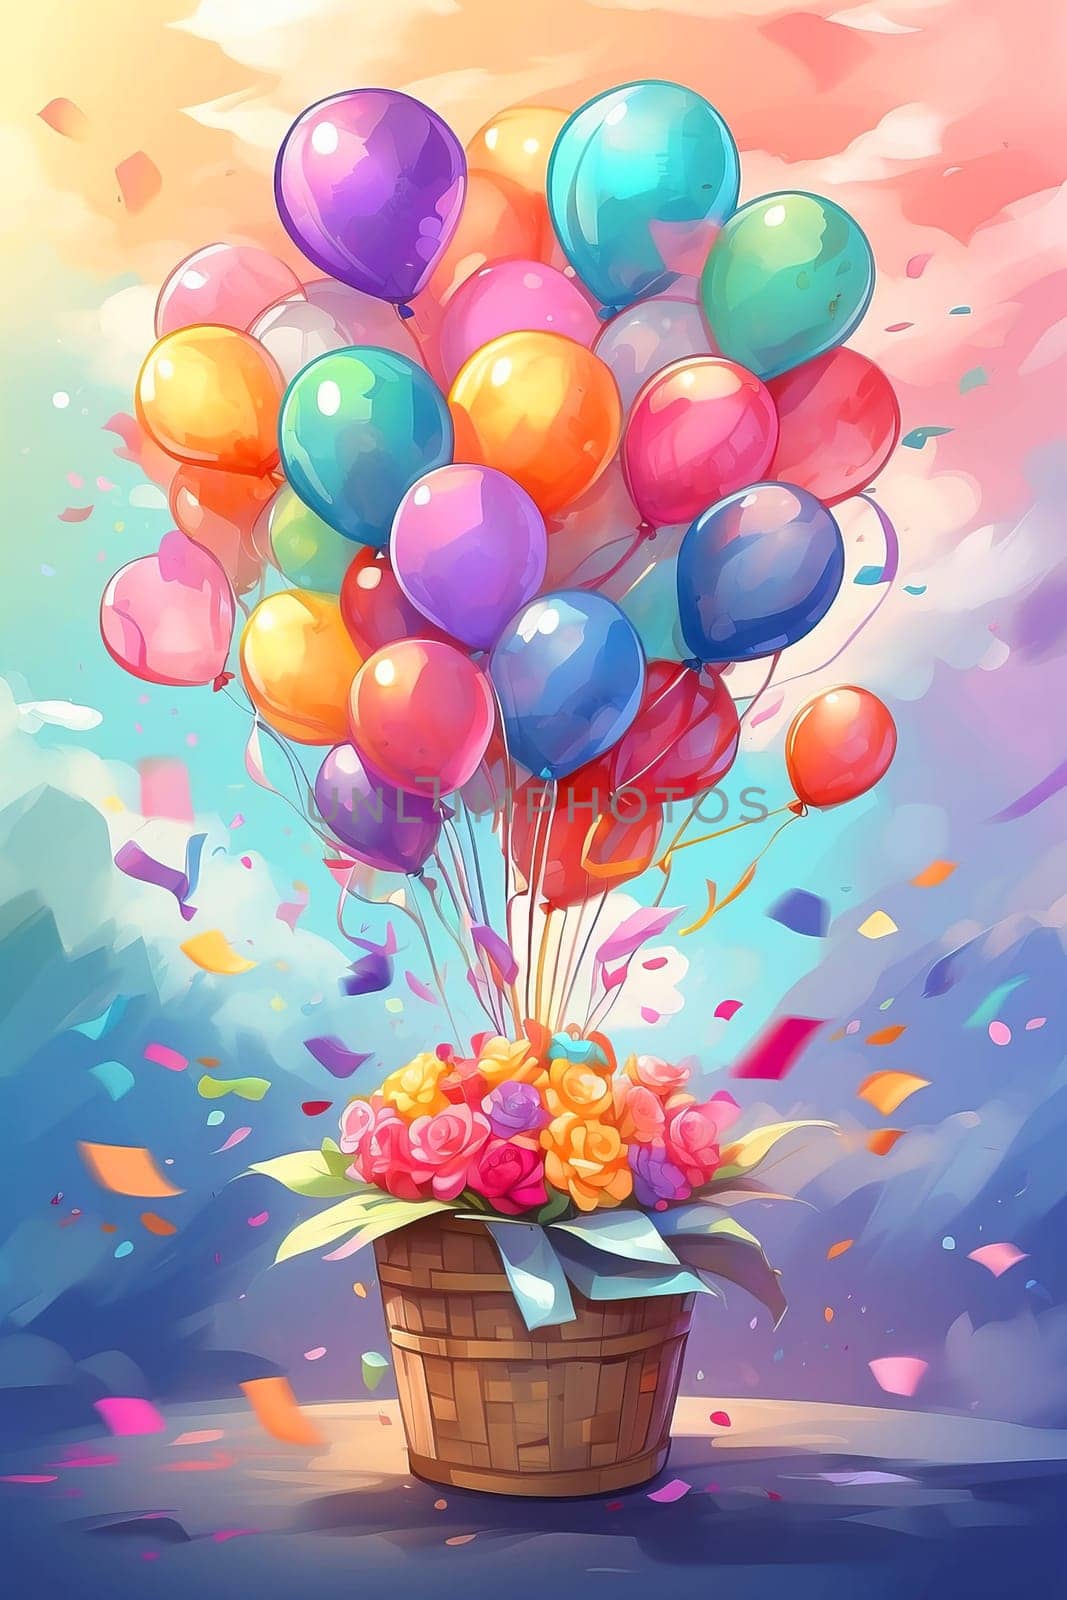 Colored balloons drawn watercolor by applesstock